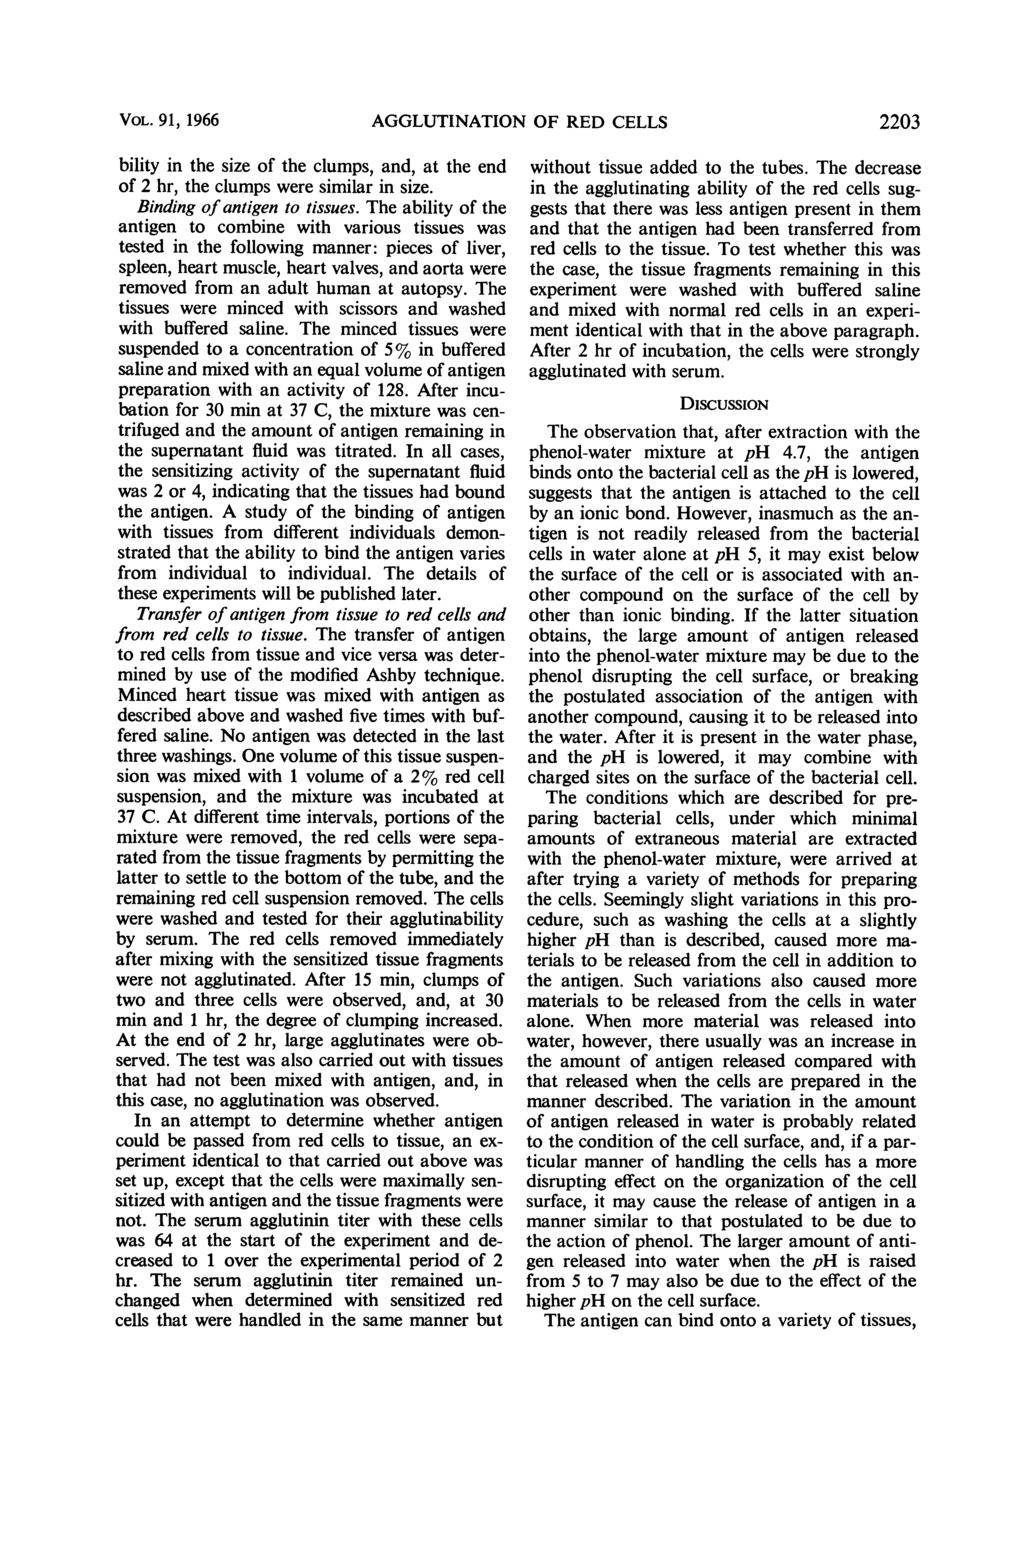 VOL. 91, 1966 AGGLUTINATION OF RED CELLS 2203 bility in the size of the clumps, and, at the end of 2 hr, the clumps were similar in size. Binding of antigen to tissues.